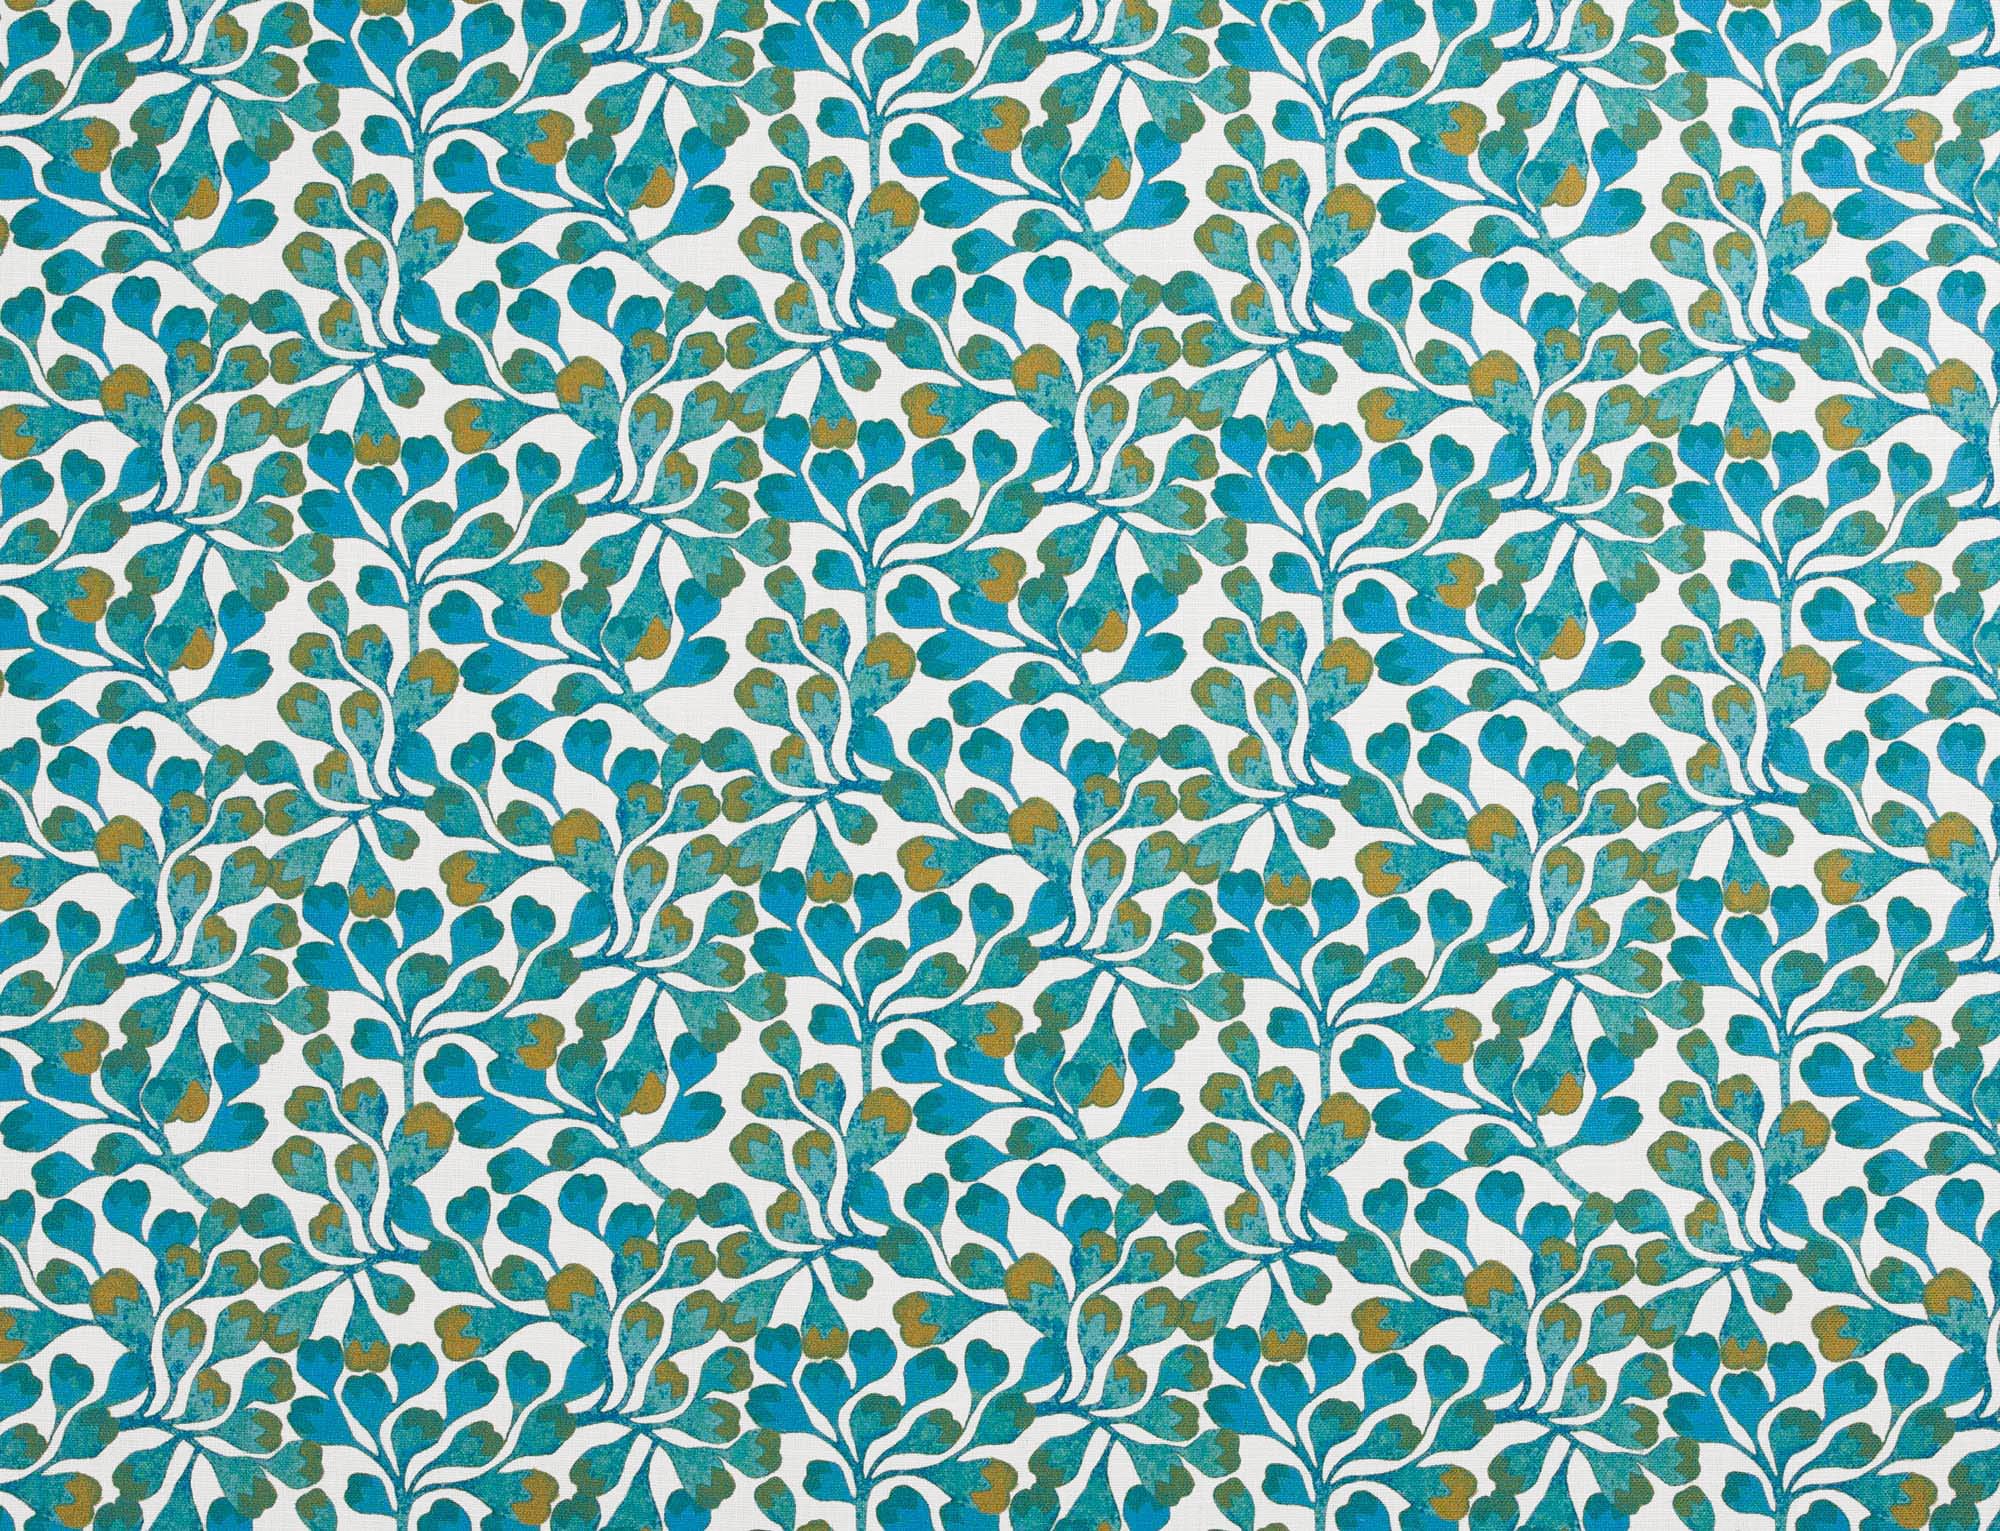 Detail of fabric in an abstract botanical print in blue, turquoise and gold on a white field.